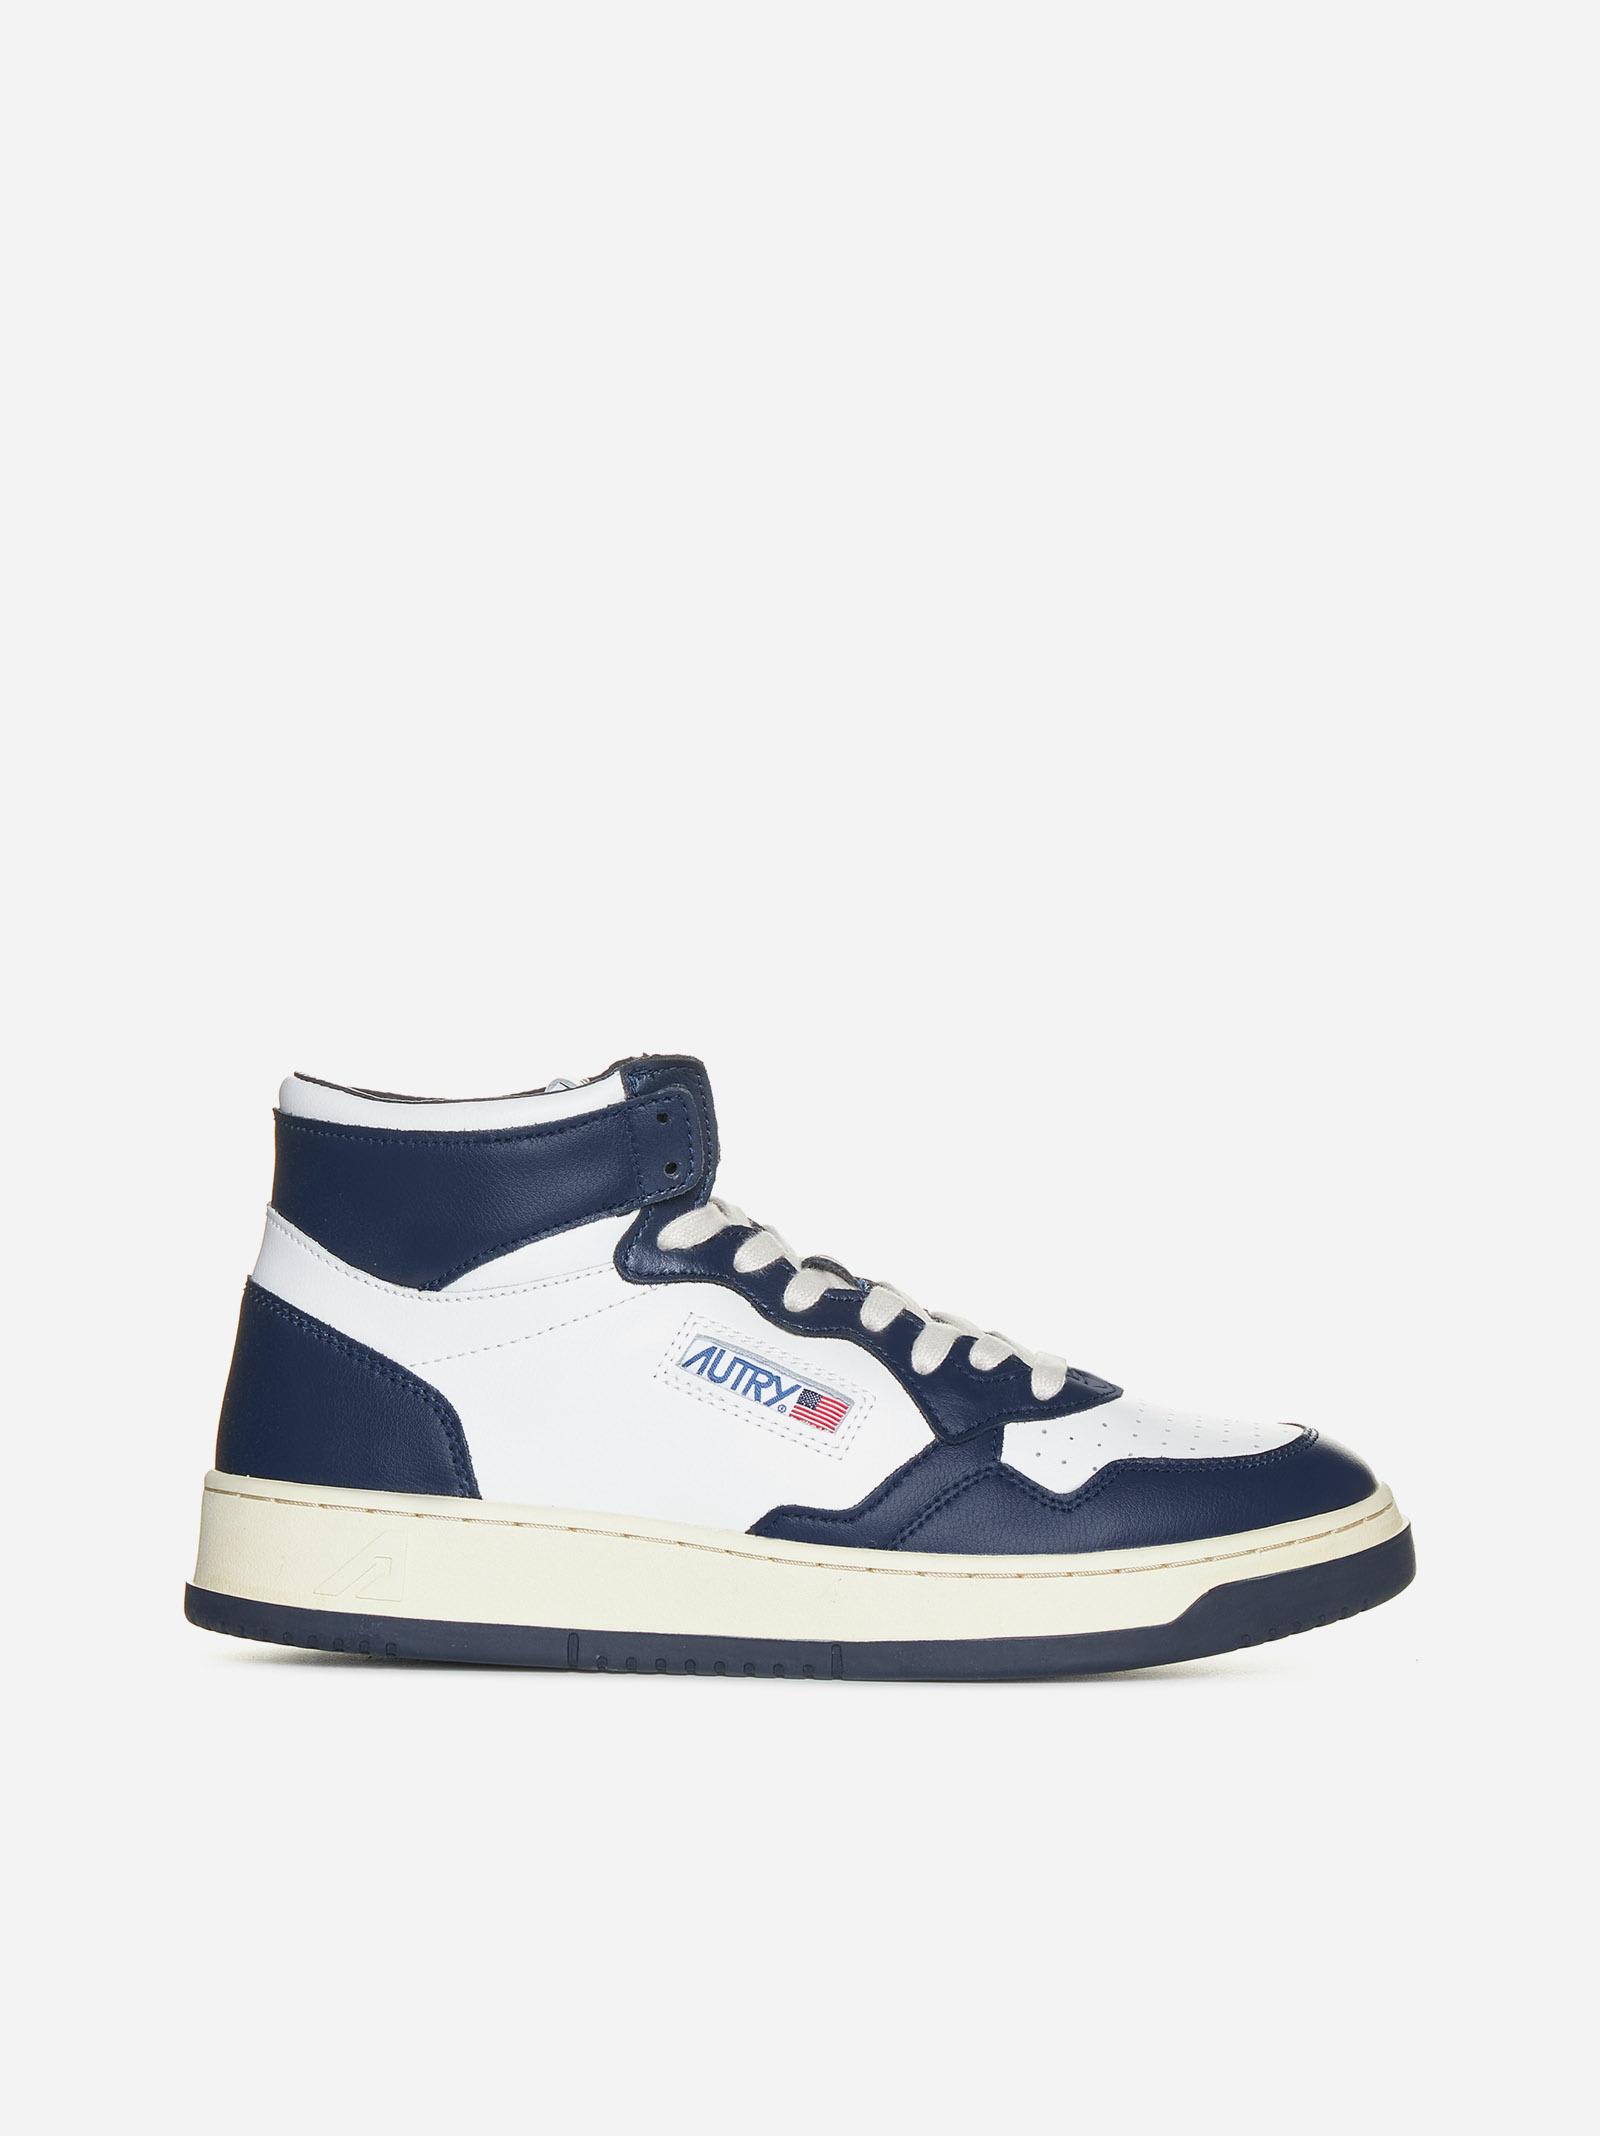 AUTRY MEDALIST LEATHER MID-TOP SNEAKERS